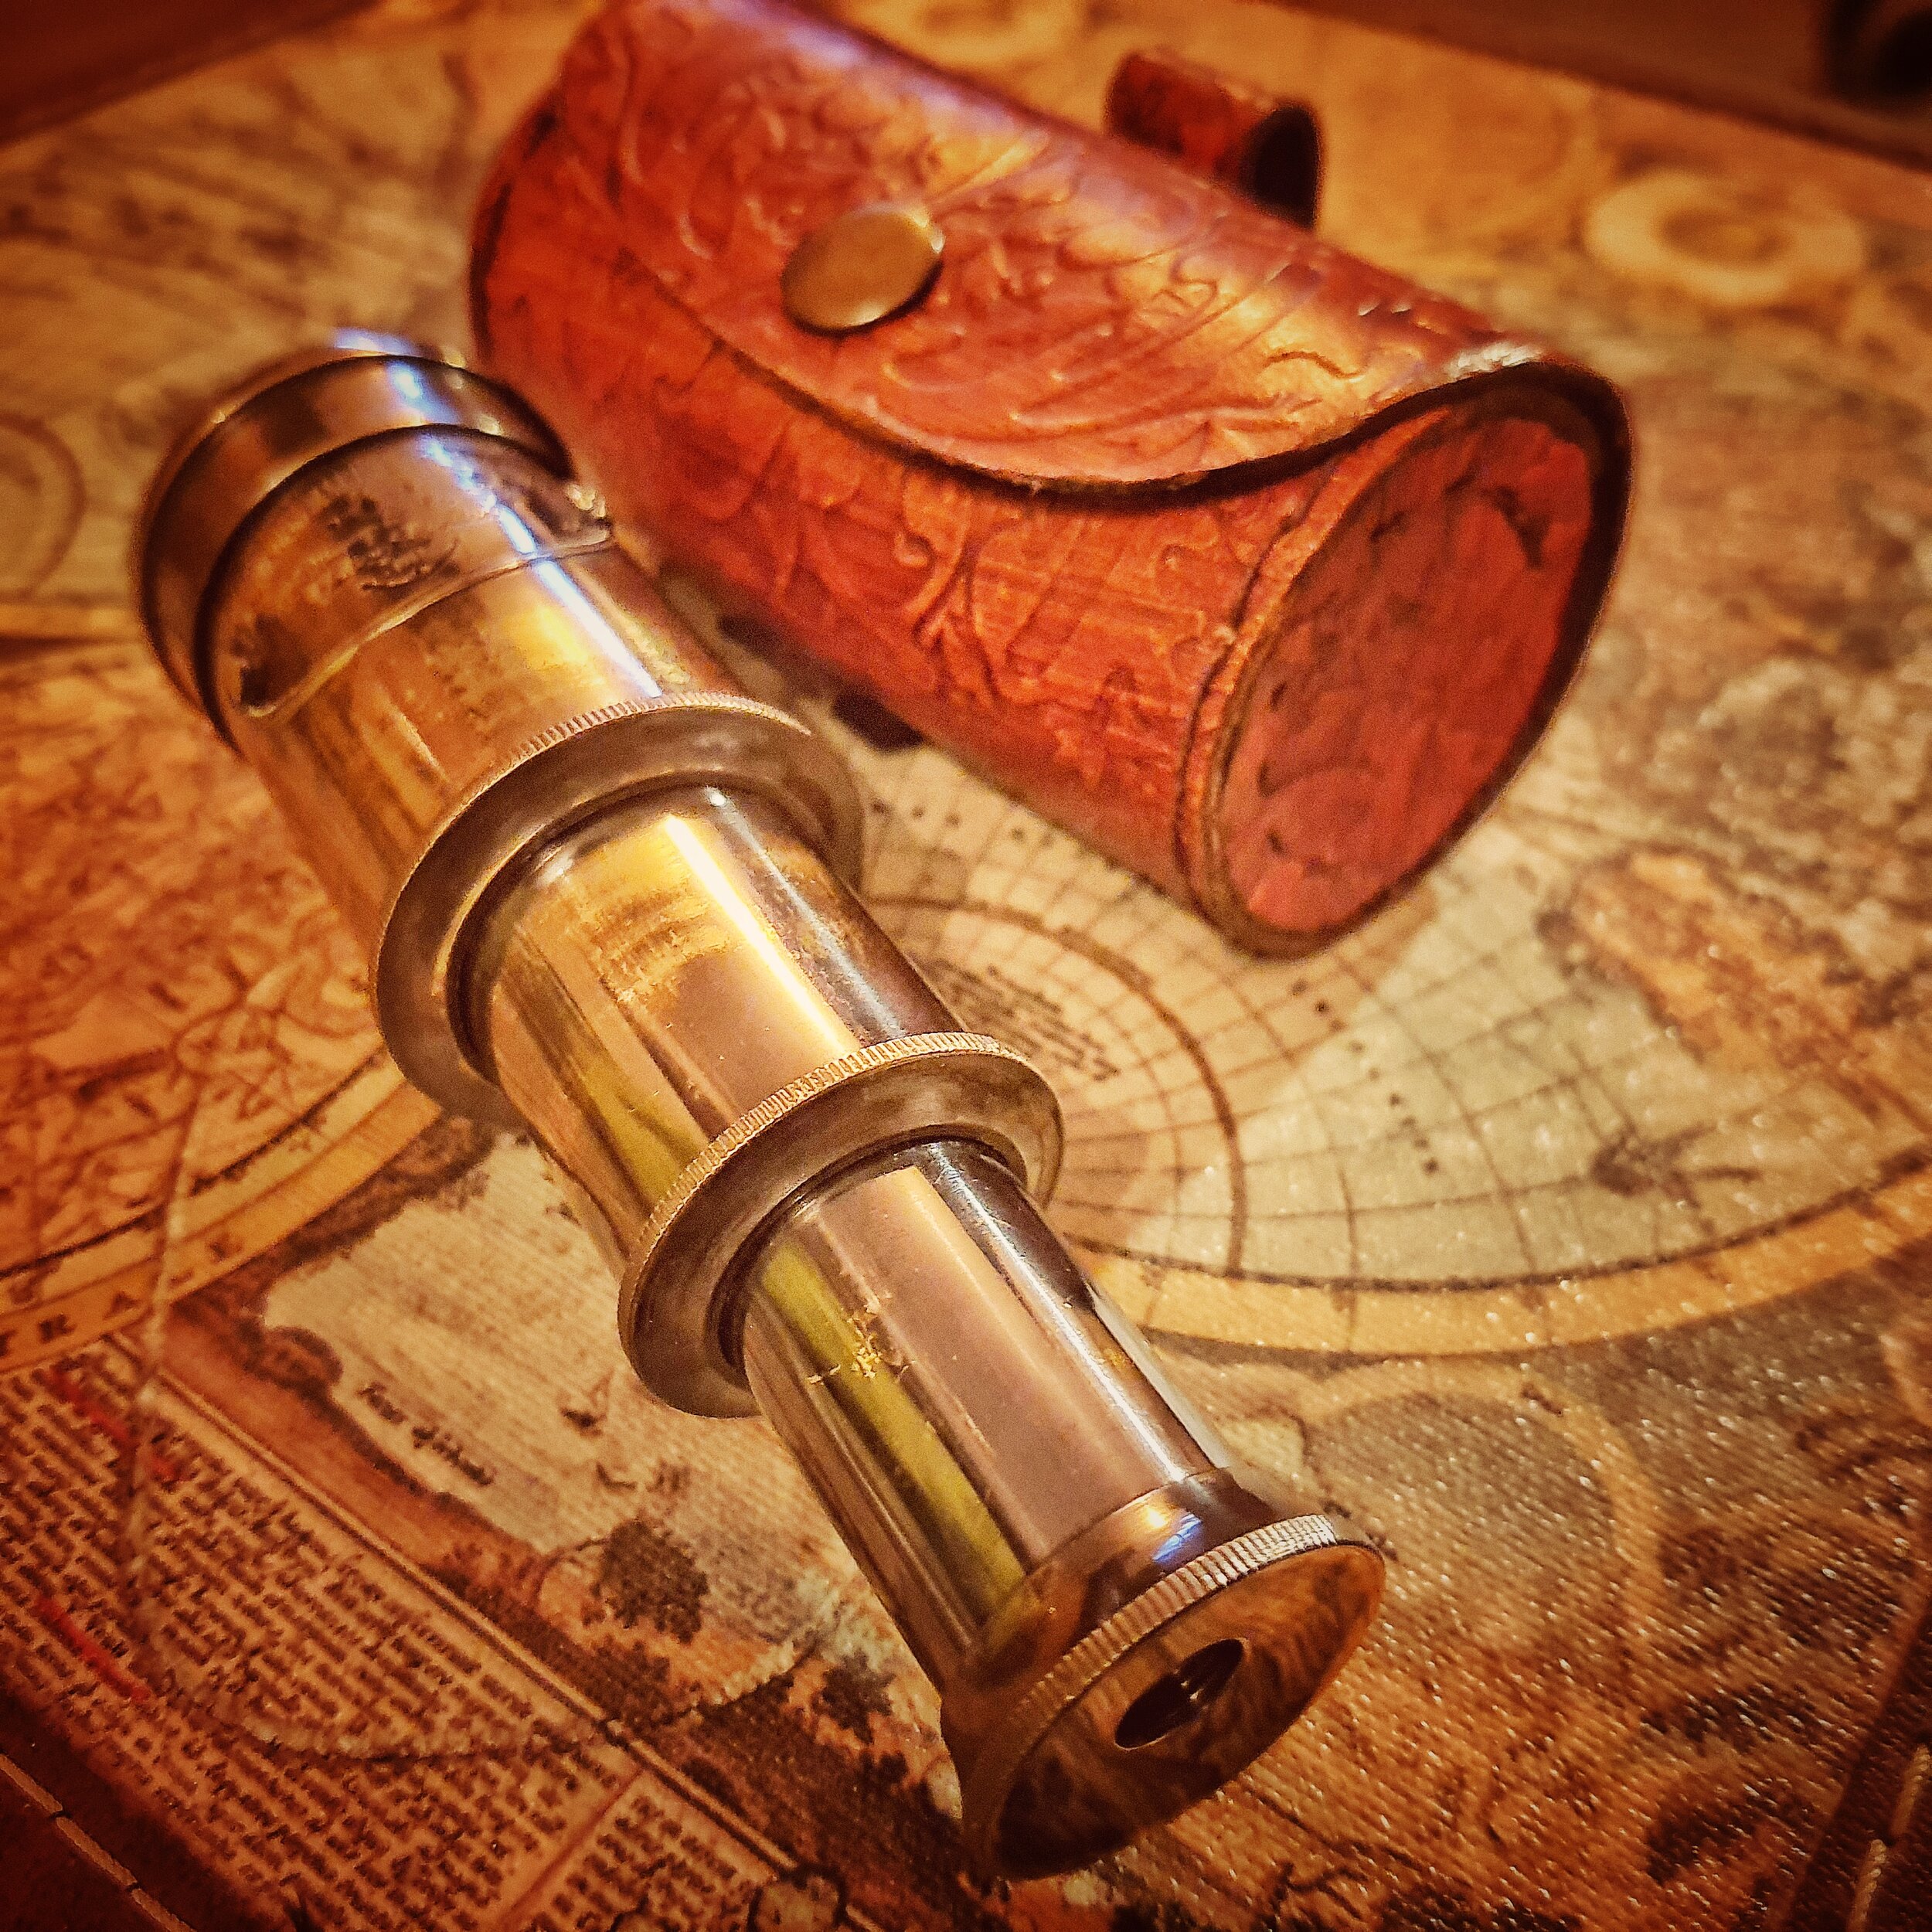 Details about   Antique Brass Telescope with Handheld Lens & Compass in Wooden Box~Set of 3 Gift 